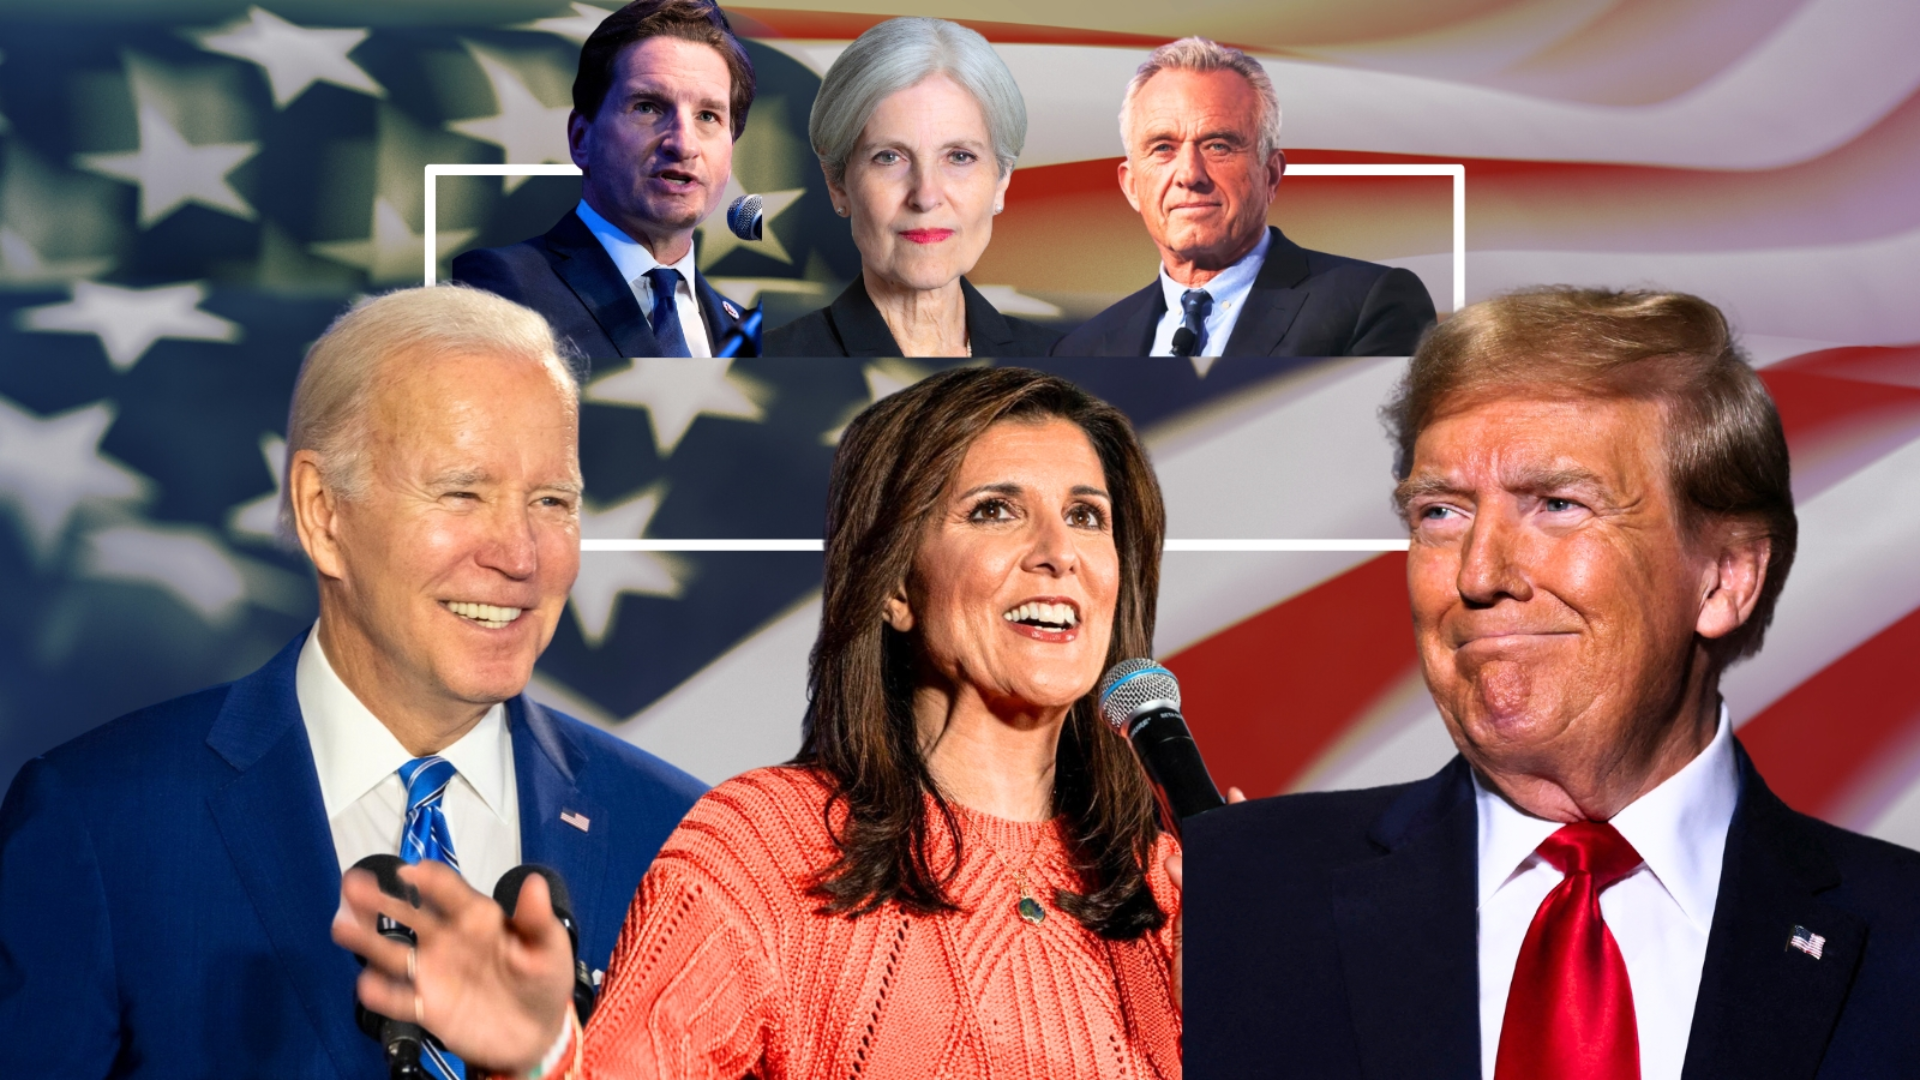 US Presidential Election 2024: Donald Trump and Joe Biden Face Off in Historic Rematch